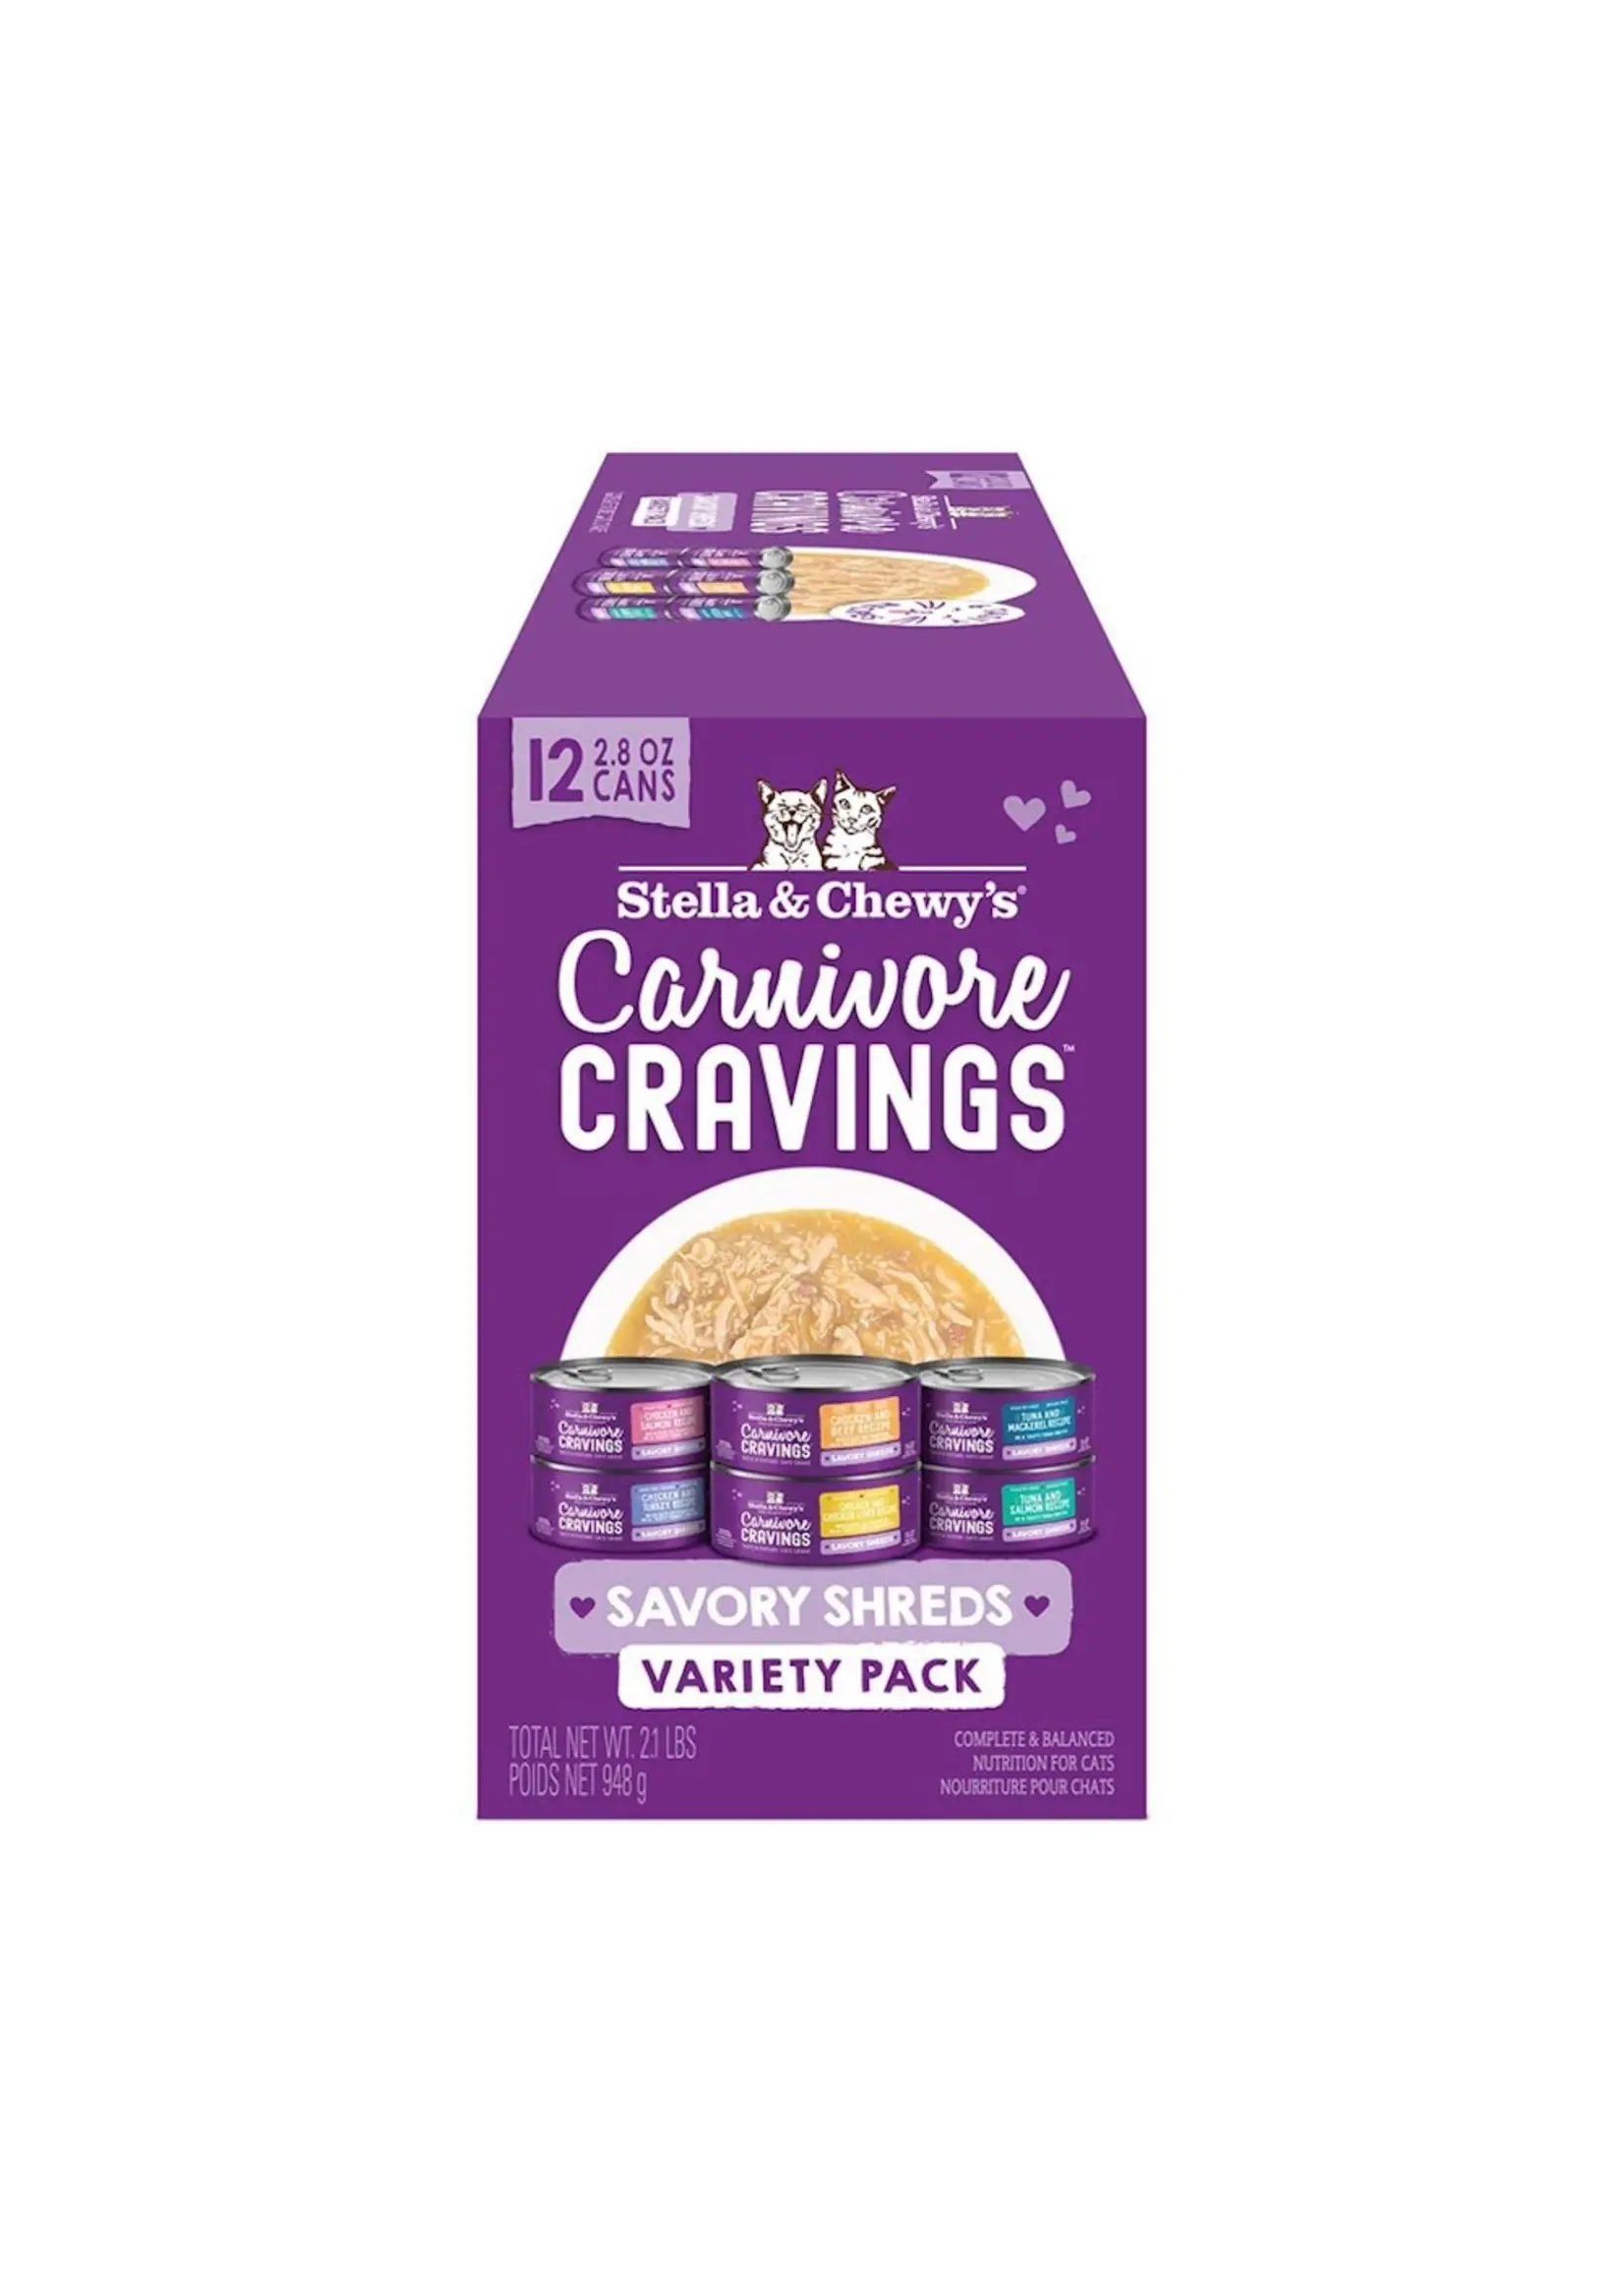 Stella & Chewy's Stella & Chewy's Carnivore Cravings 12 Count Variety Pack, 2.8oz Savory Shreds